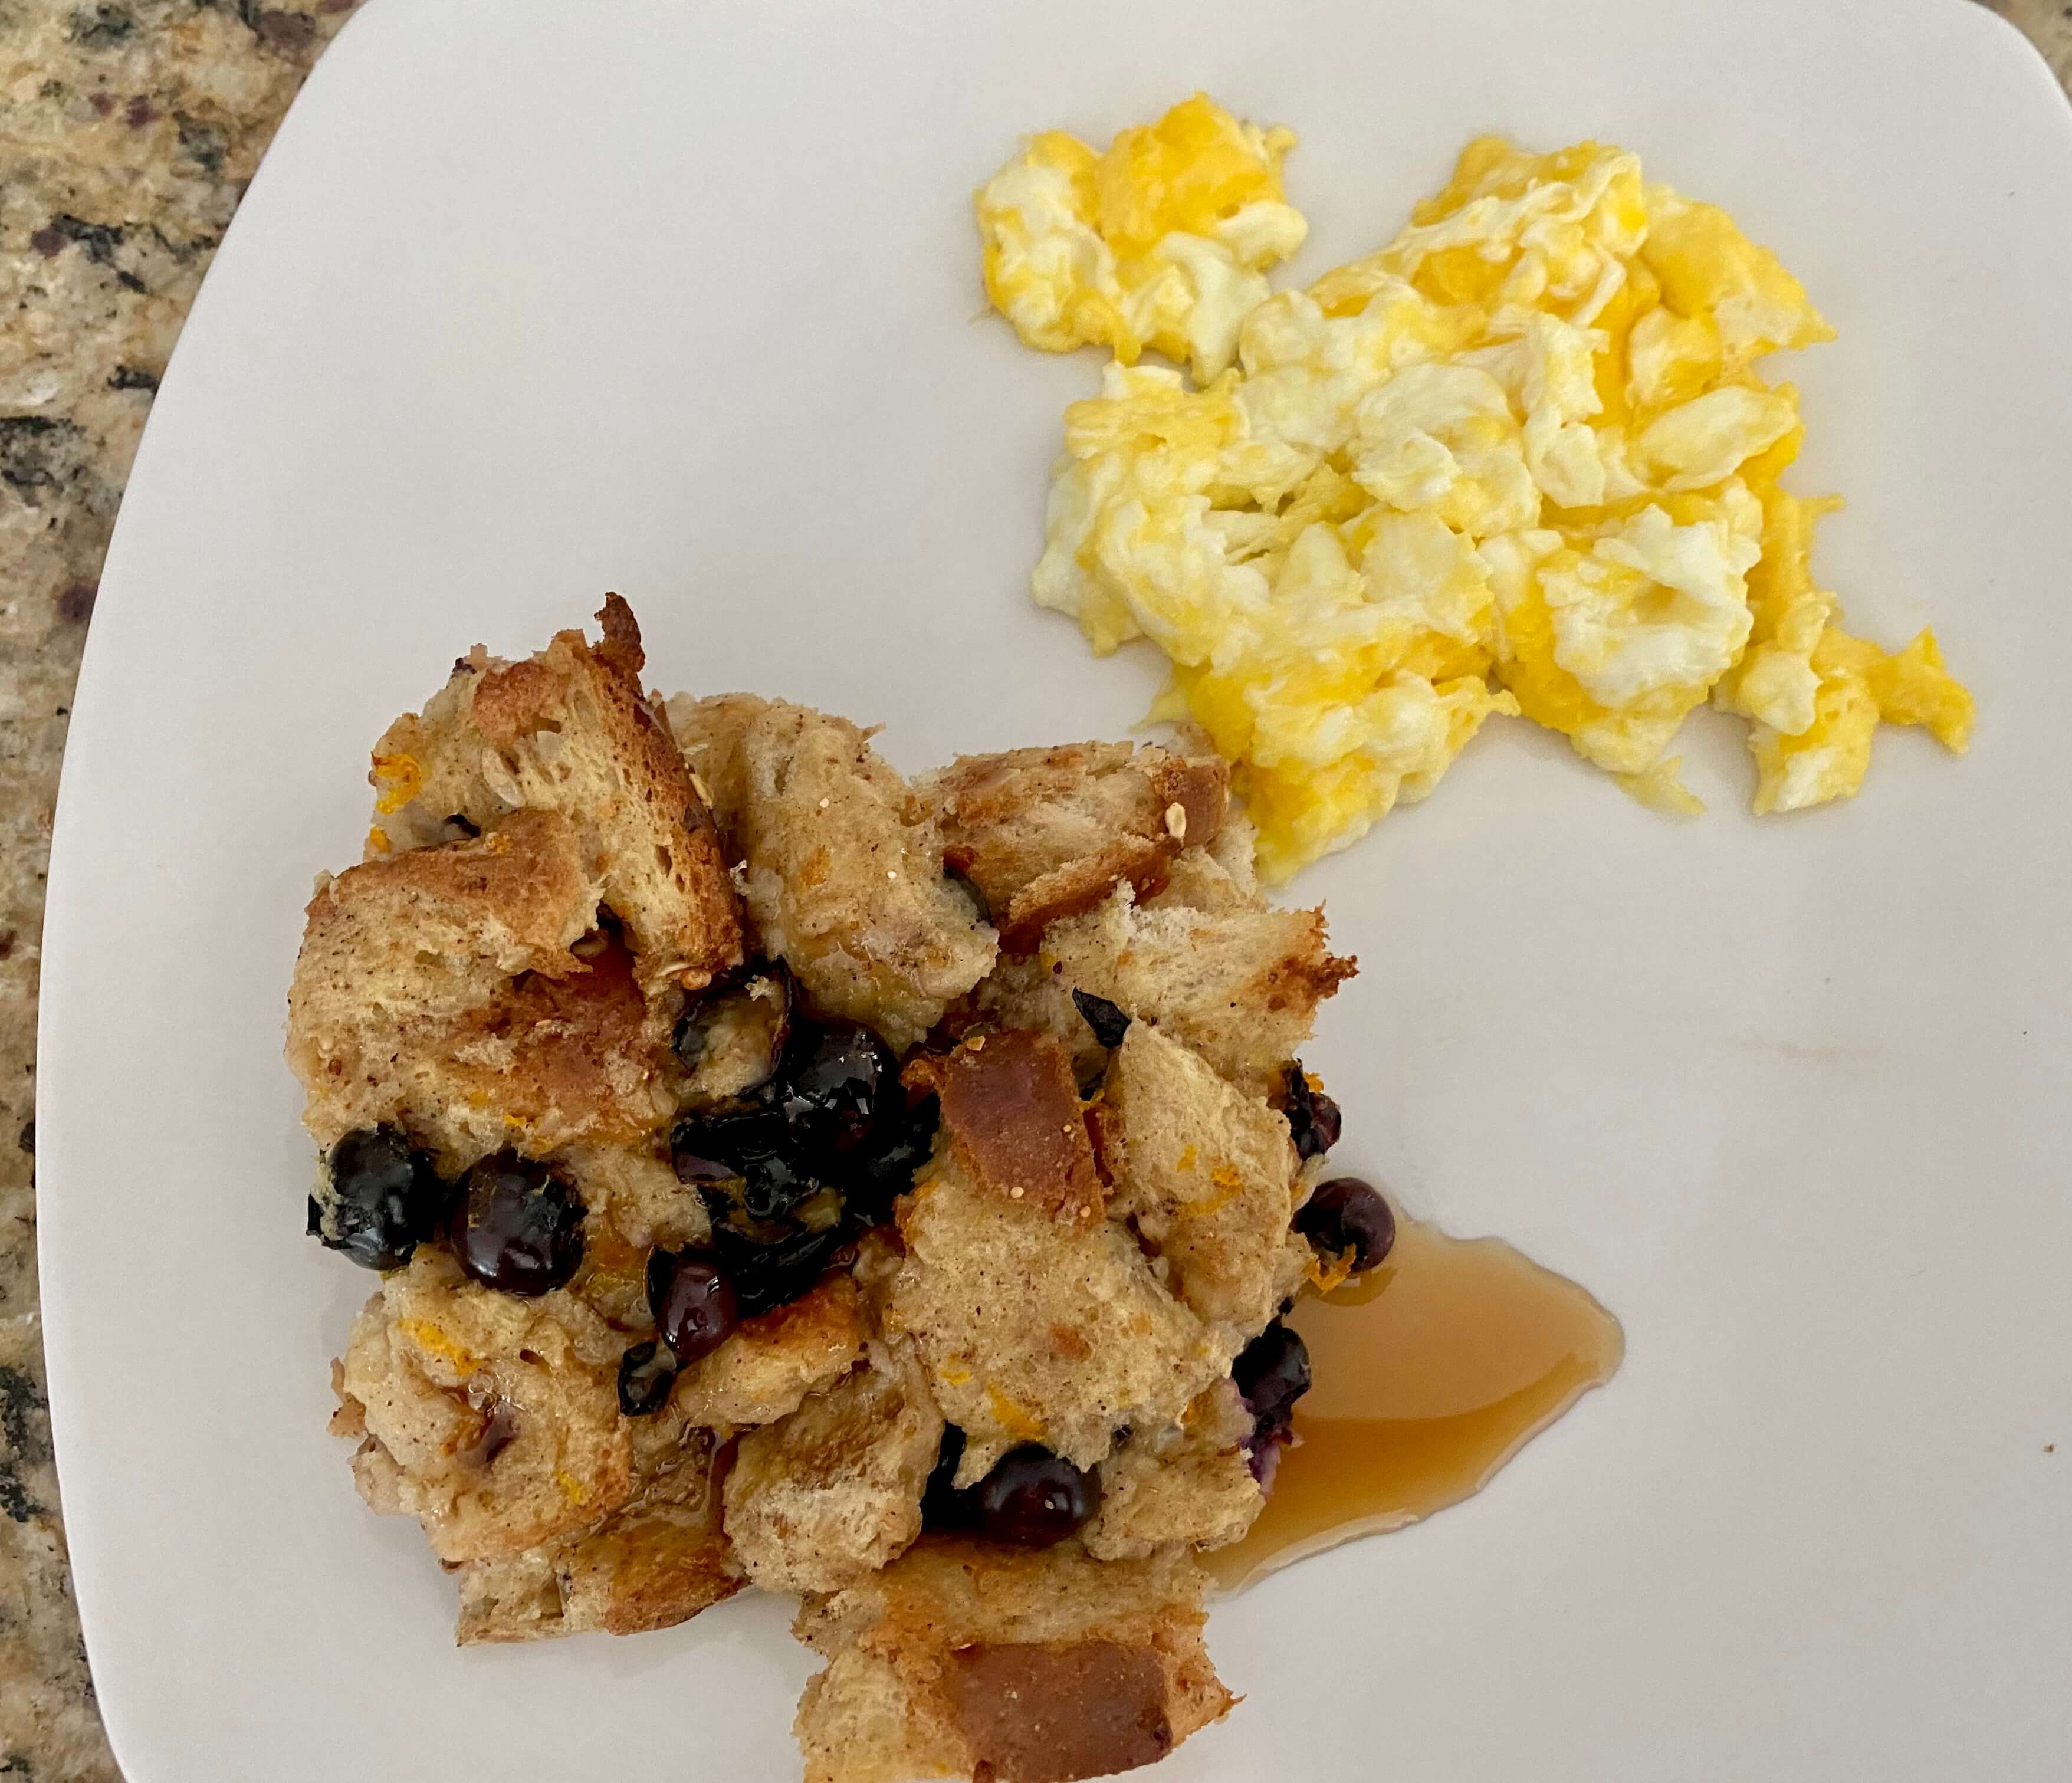 Blueberry orange french toast casserole and scrambled eggs on white plate